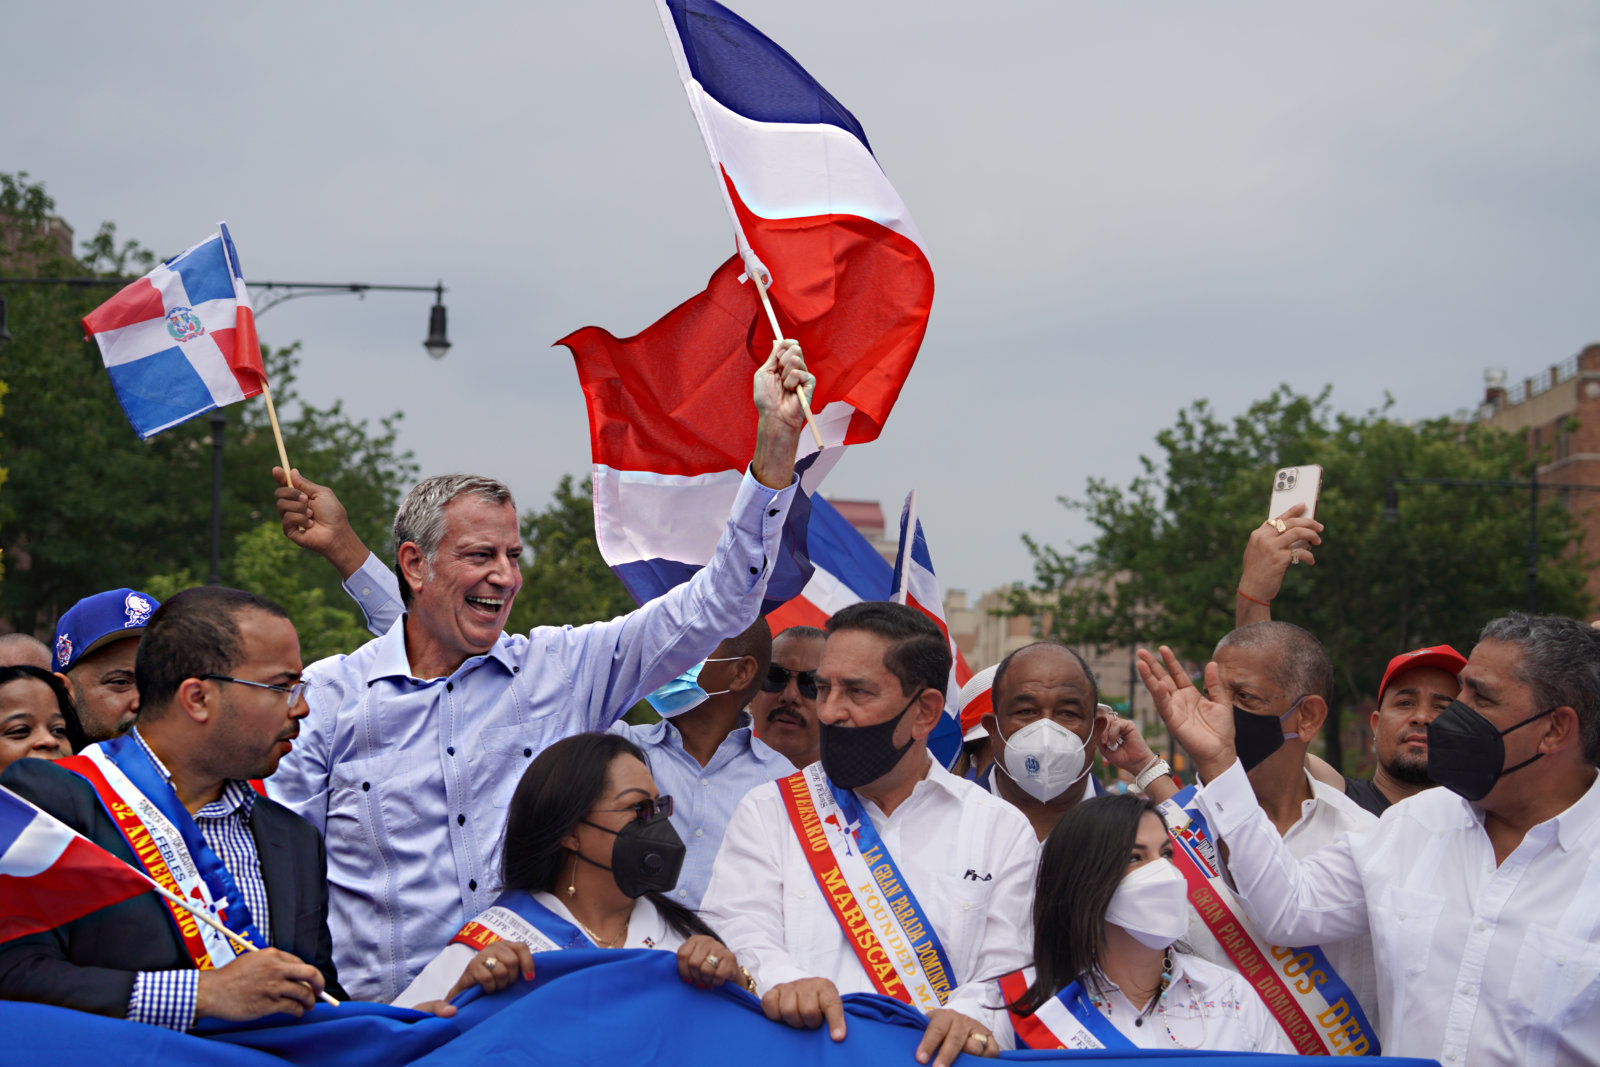 Bronx Dominican Day Parade brings hundreds of spectators and